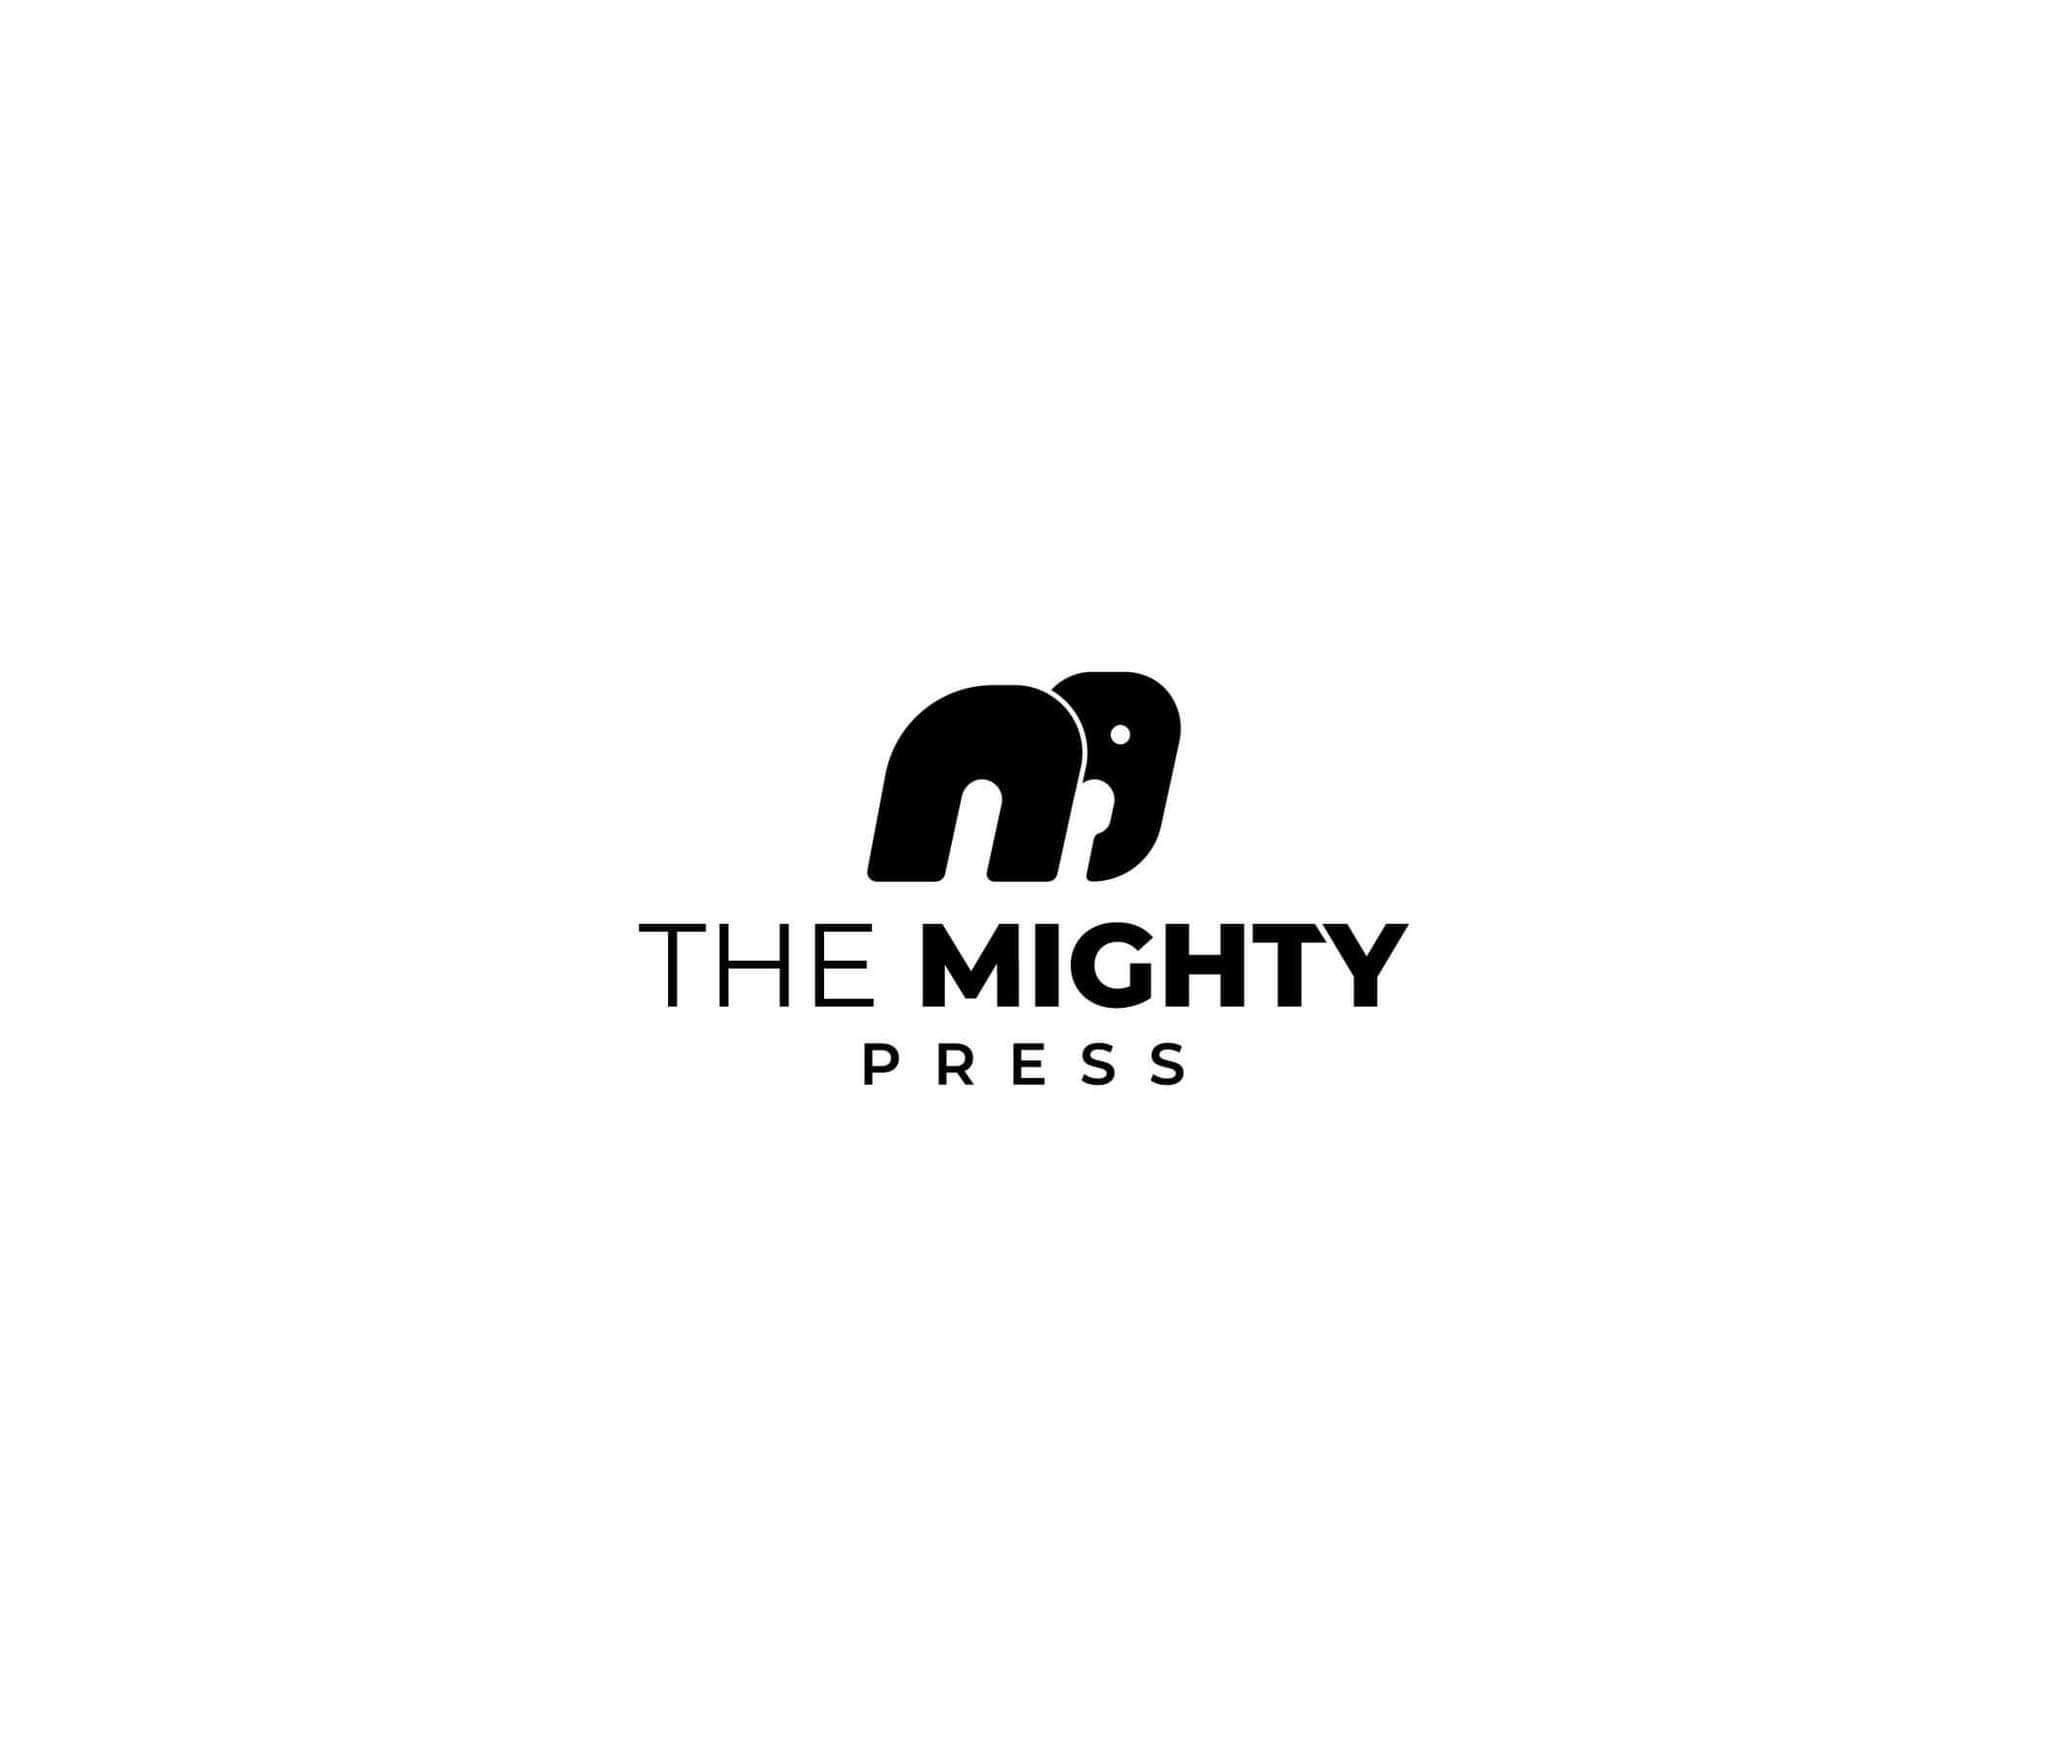 The Mighty Press